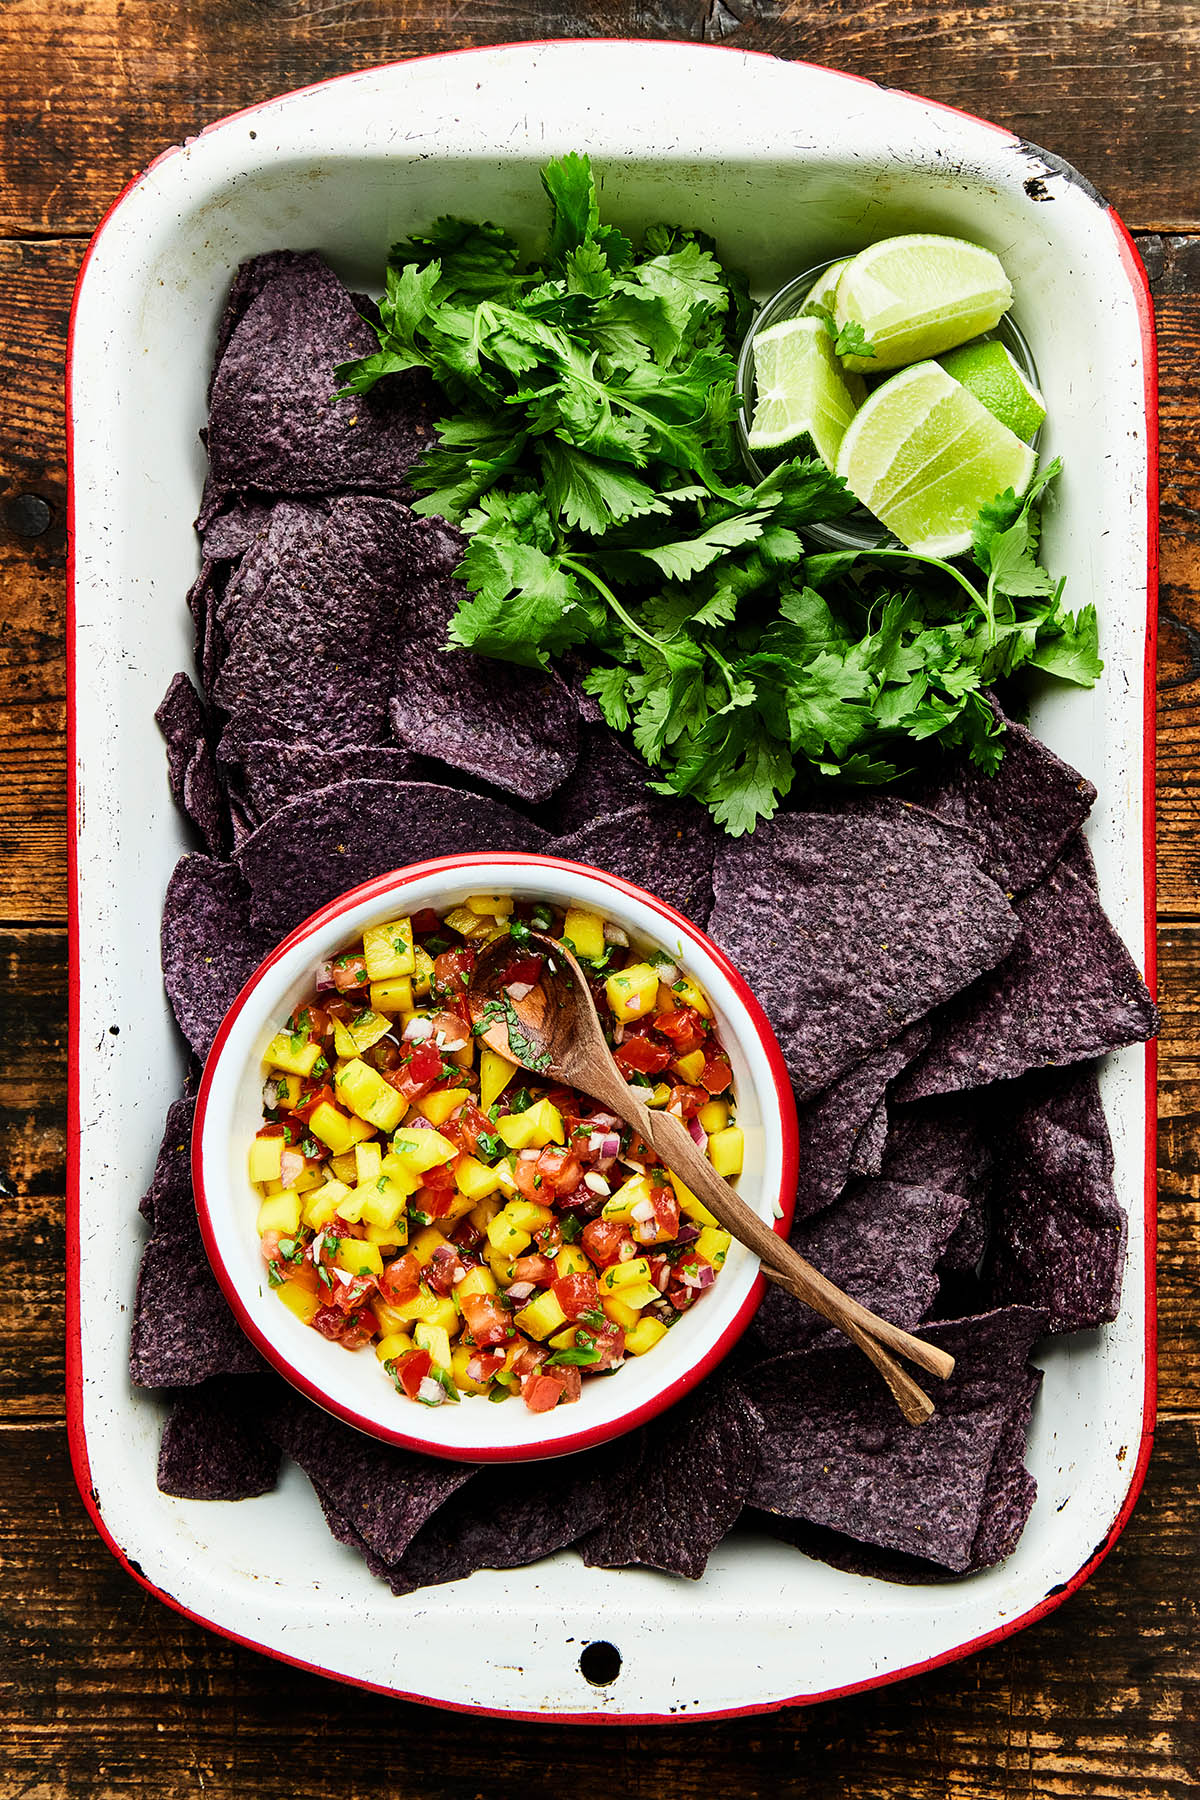 A white rectangle enamel dish with red trim filled with blue corn chips, cilantro, sliced limes, and a bowl of mango pico de gallo.